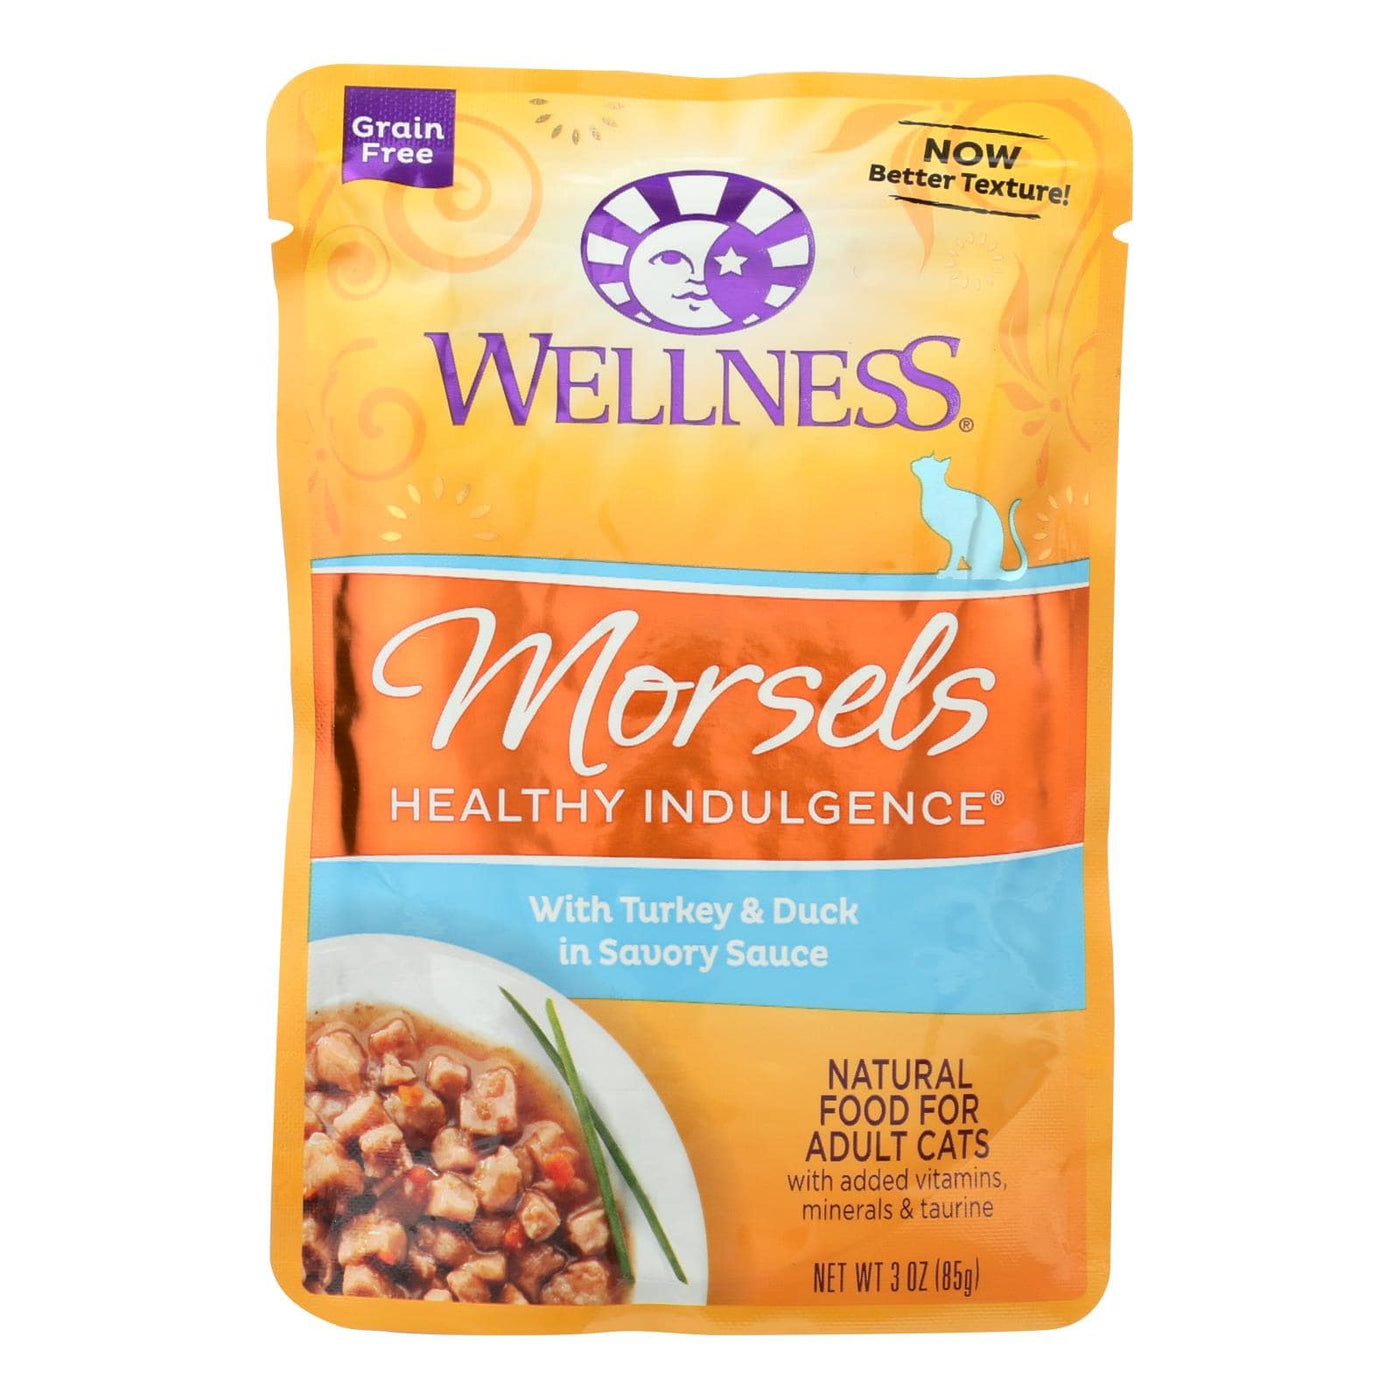 Buy Wellness Pet Products Cat Food - Morsels With Turkey And Duck In Savory Sauce - Case Of 24 - 3 Oz.  at OnlyNaturals.us